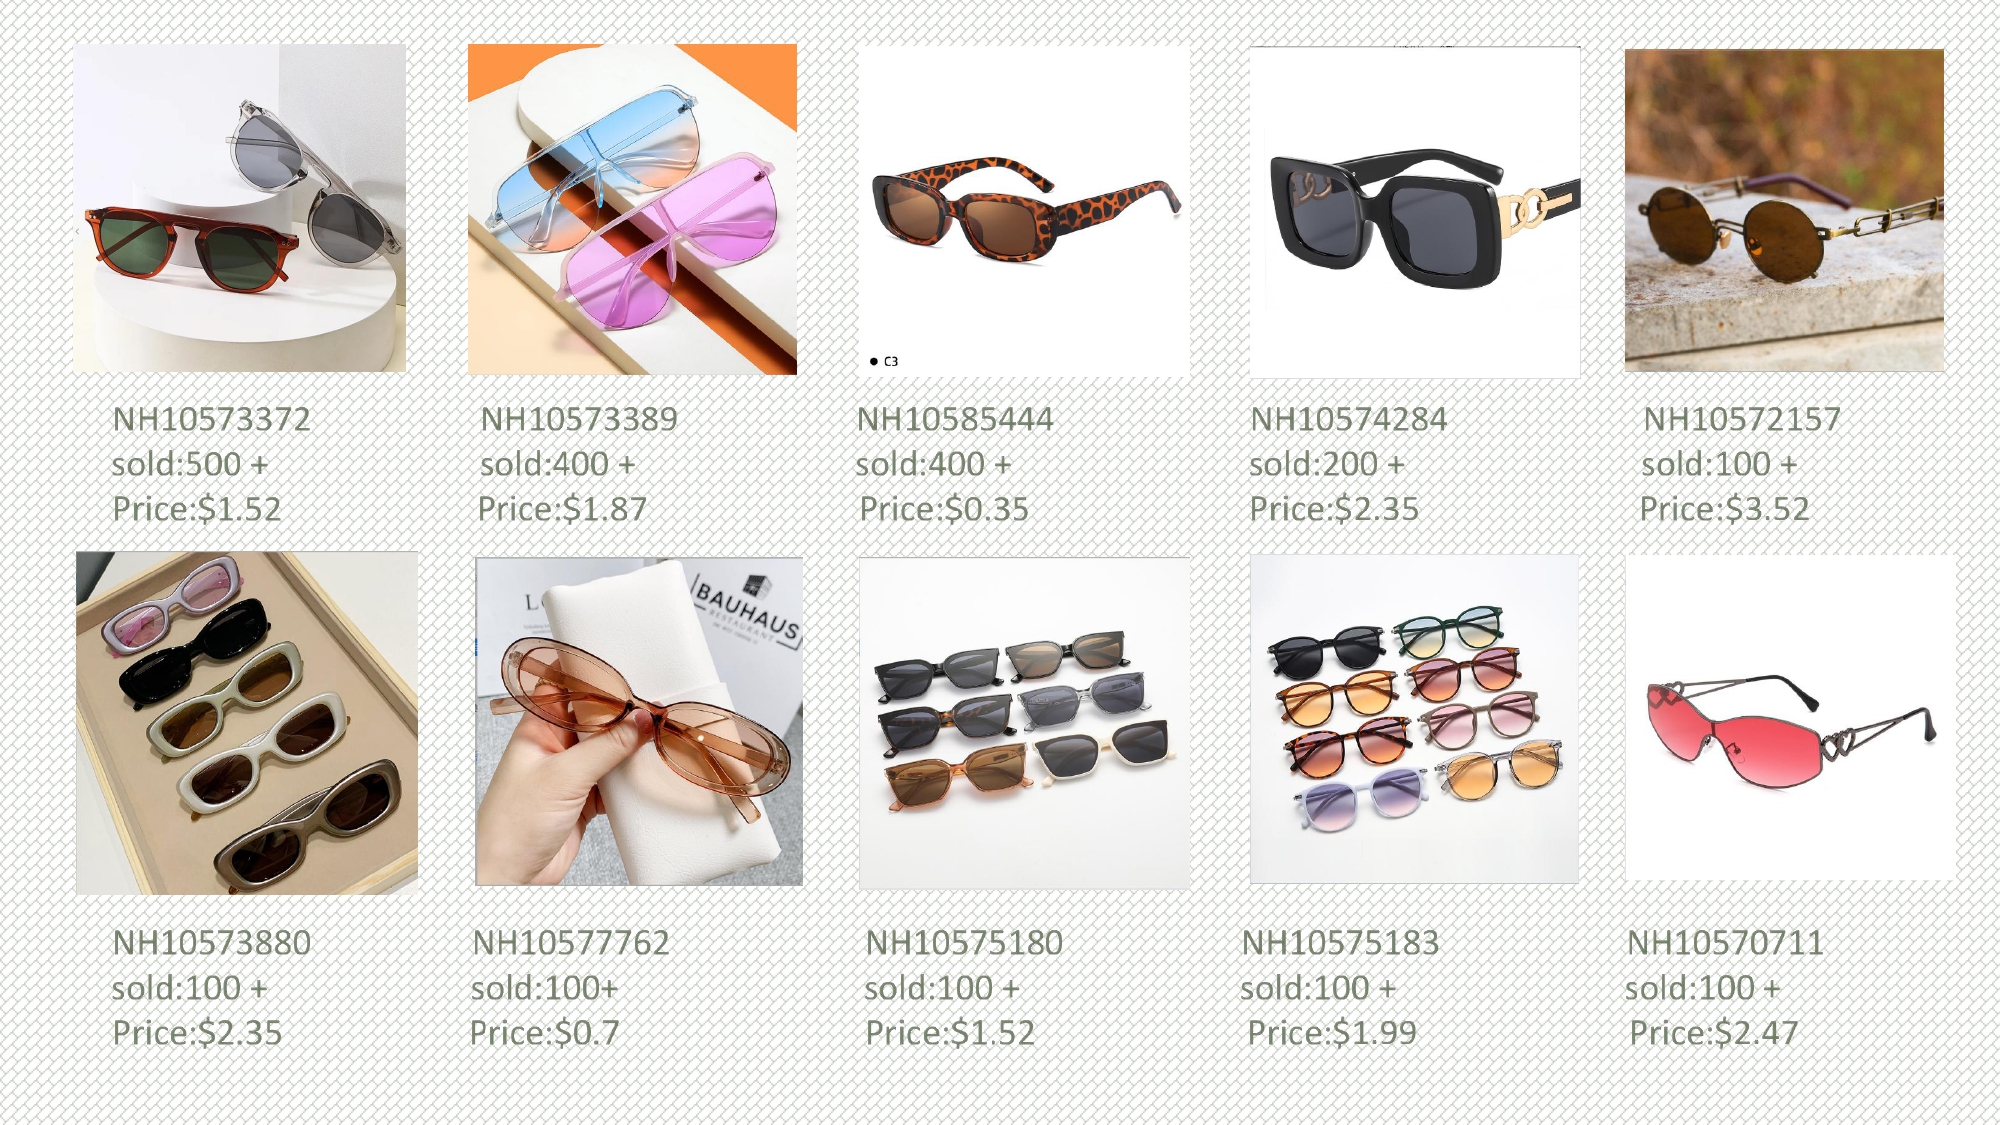 Sunglasses become a fashion single product for woman in the summer. 